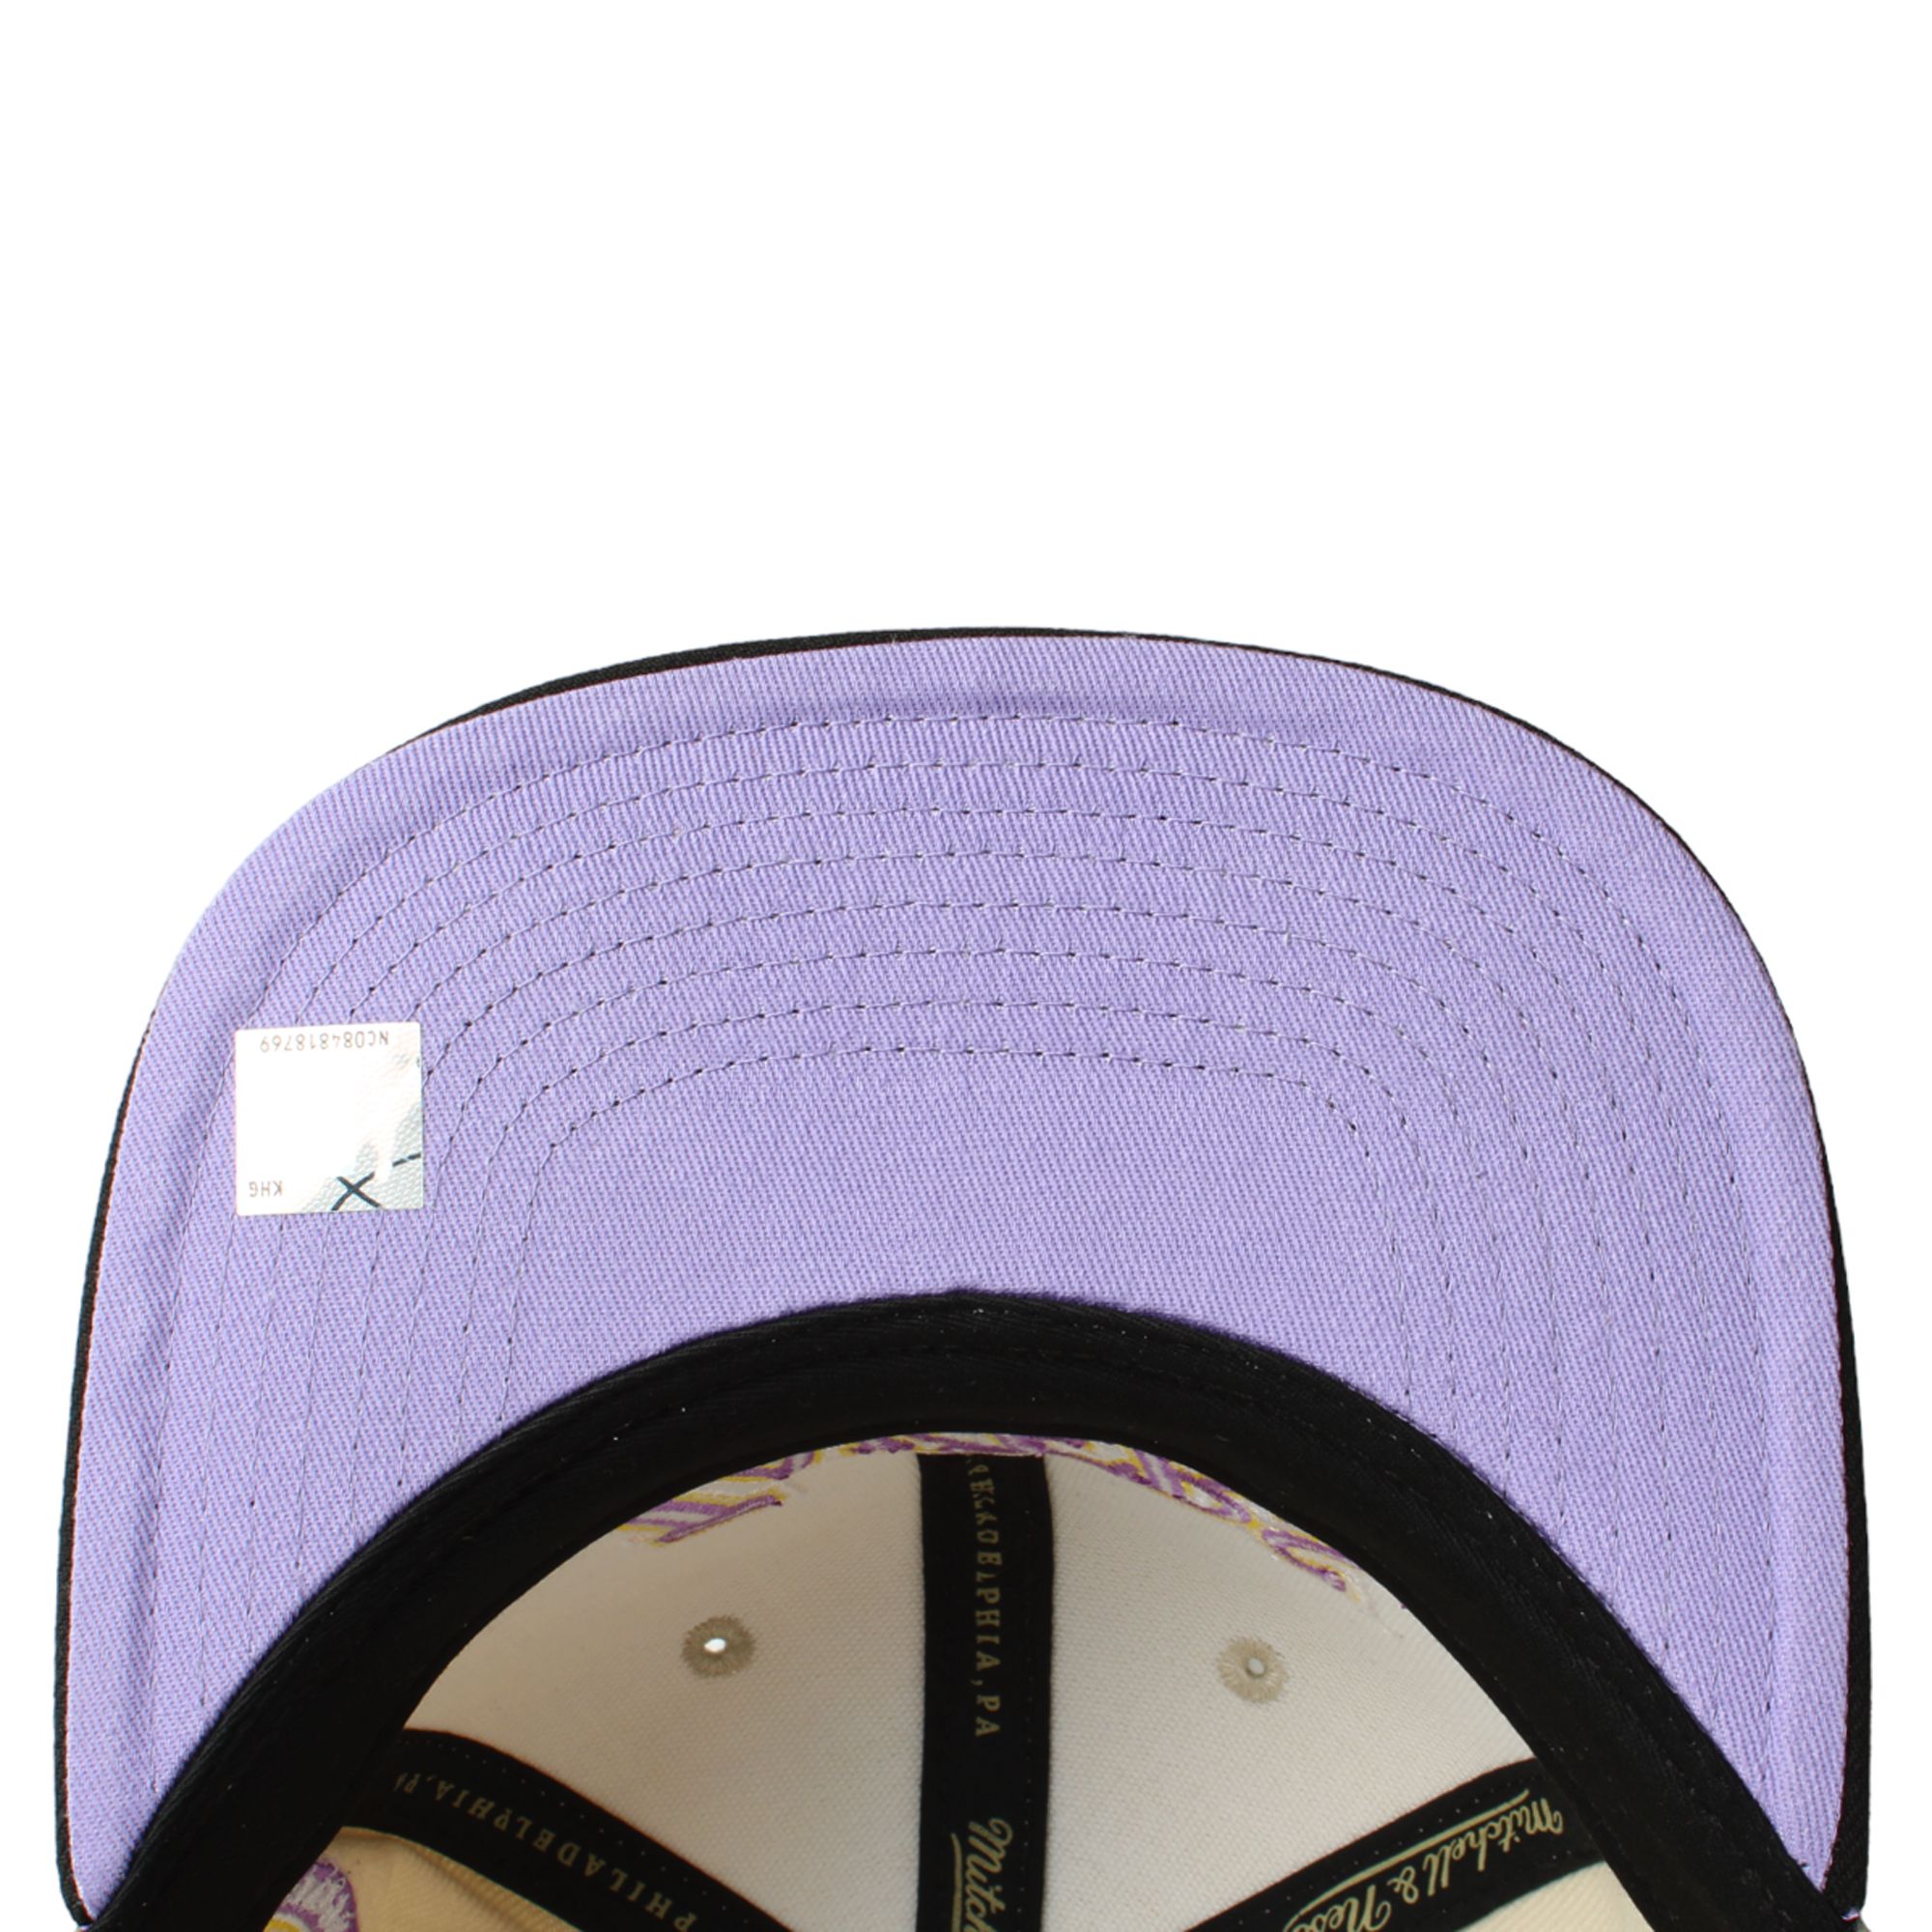 Los Angeles Lakers Mitchell & Ness Pastel Snapback Hat - White